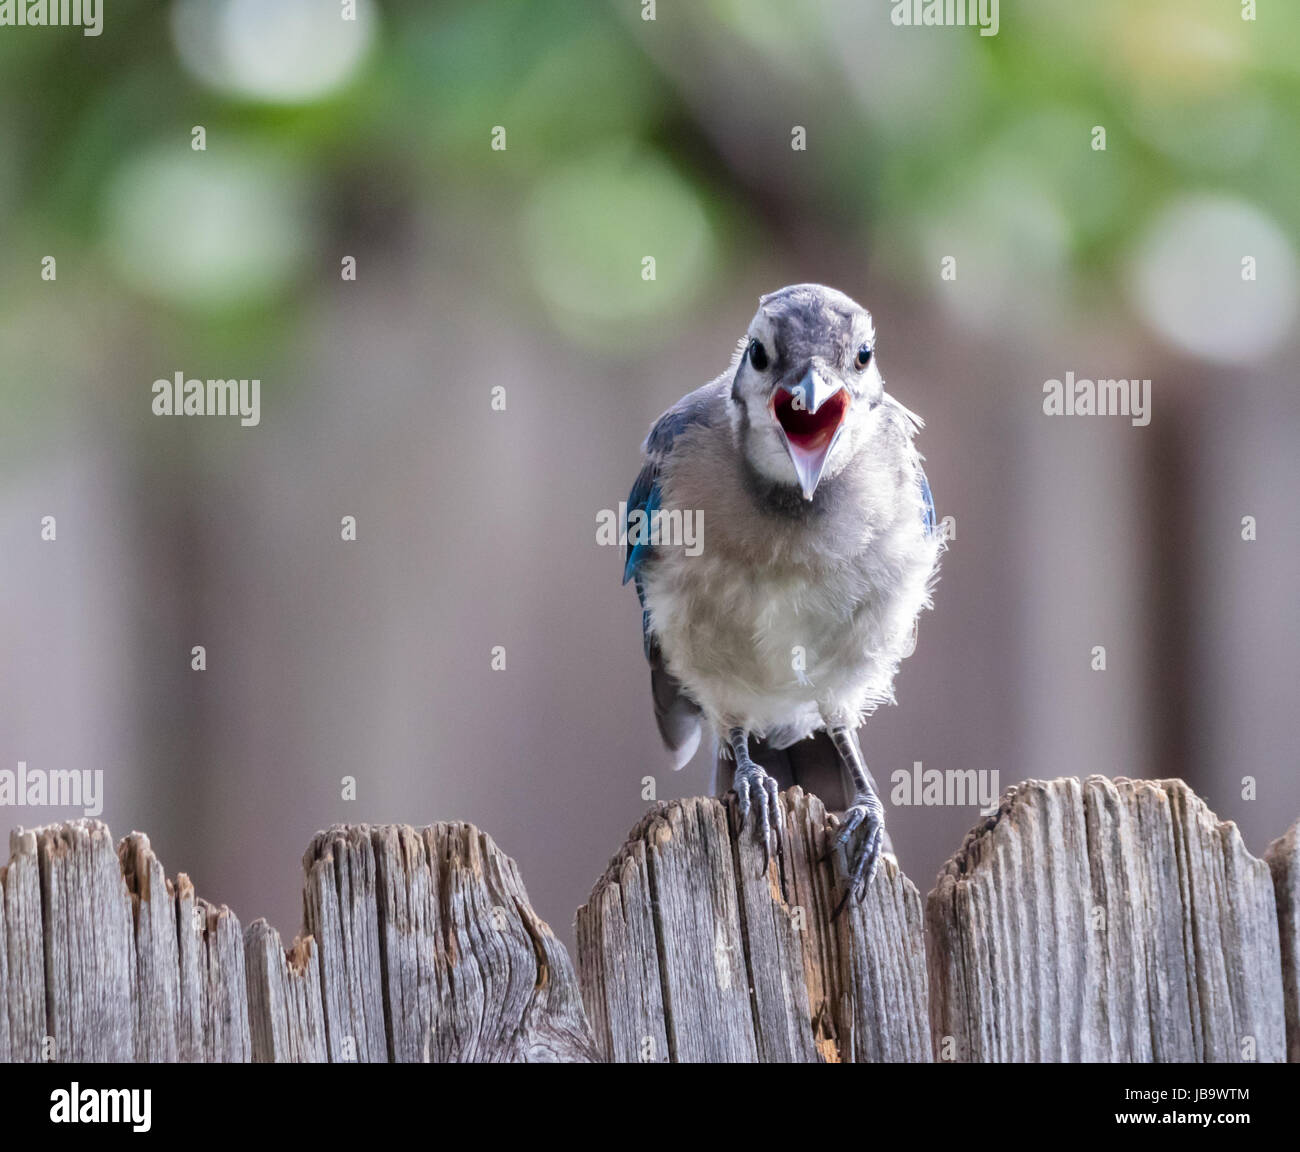 Young Blue Jay squawking. Stock Photo